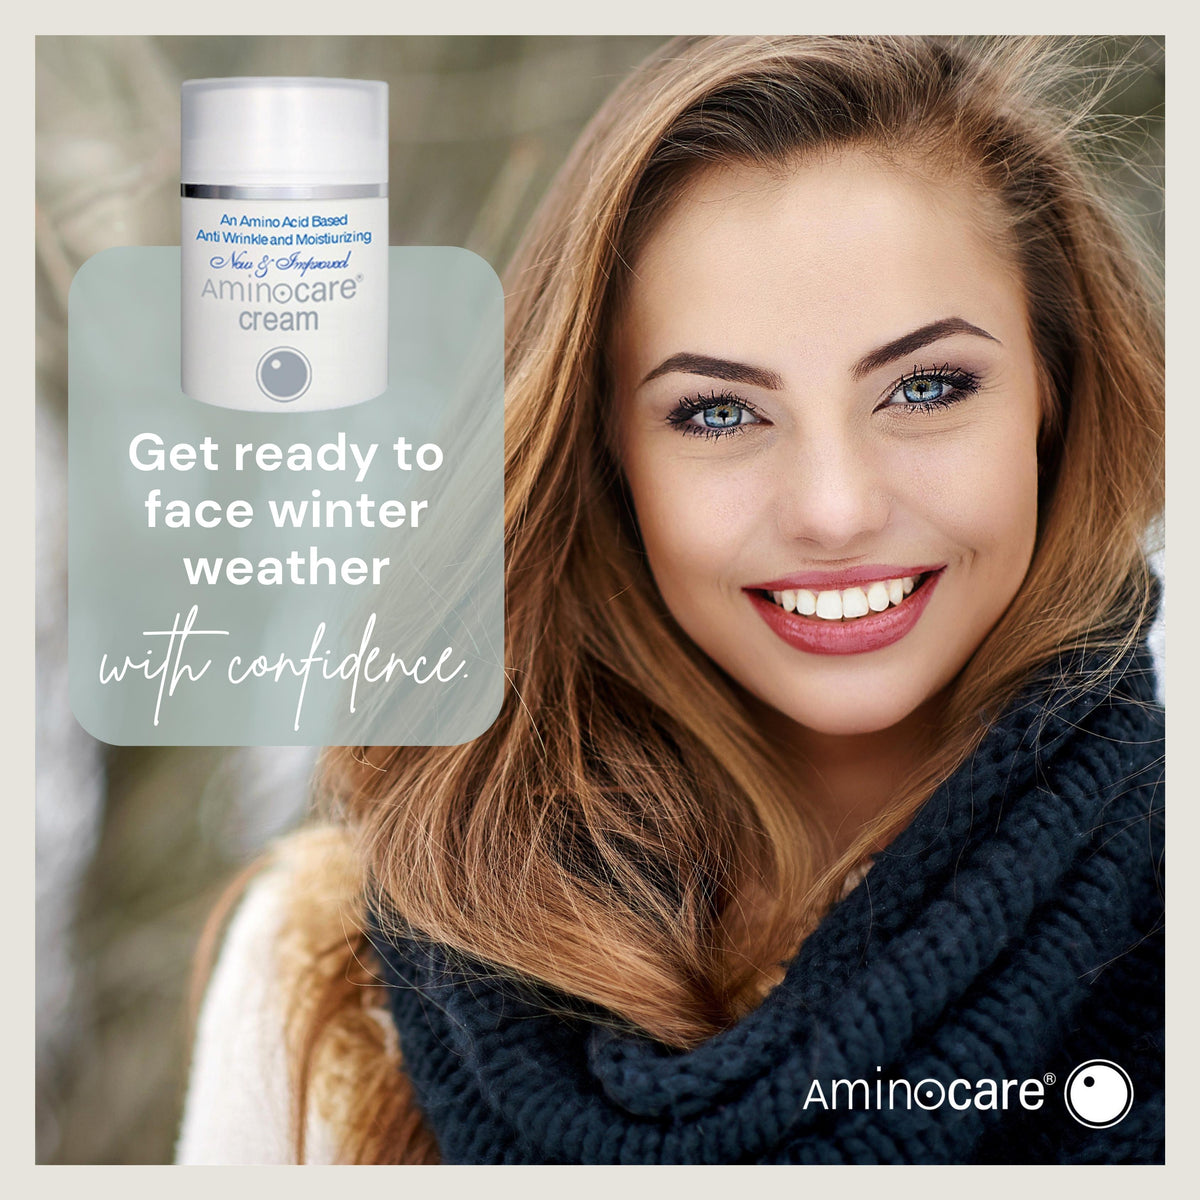 How do Amino Acids in Aminocare® products improve skin during the winter season?